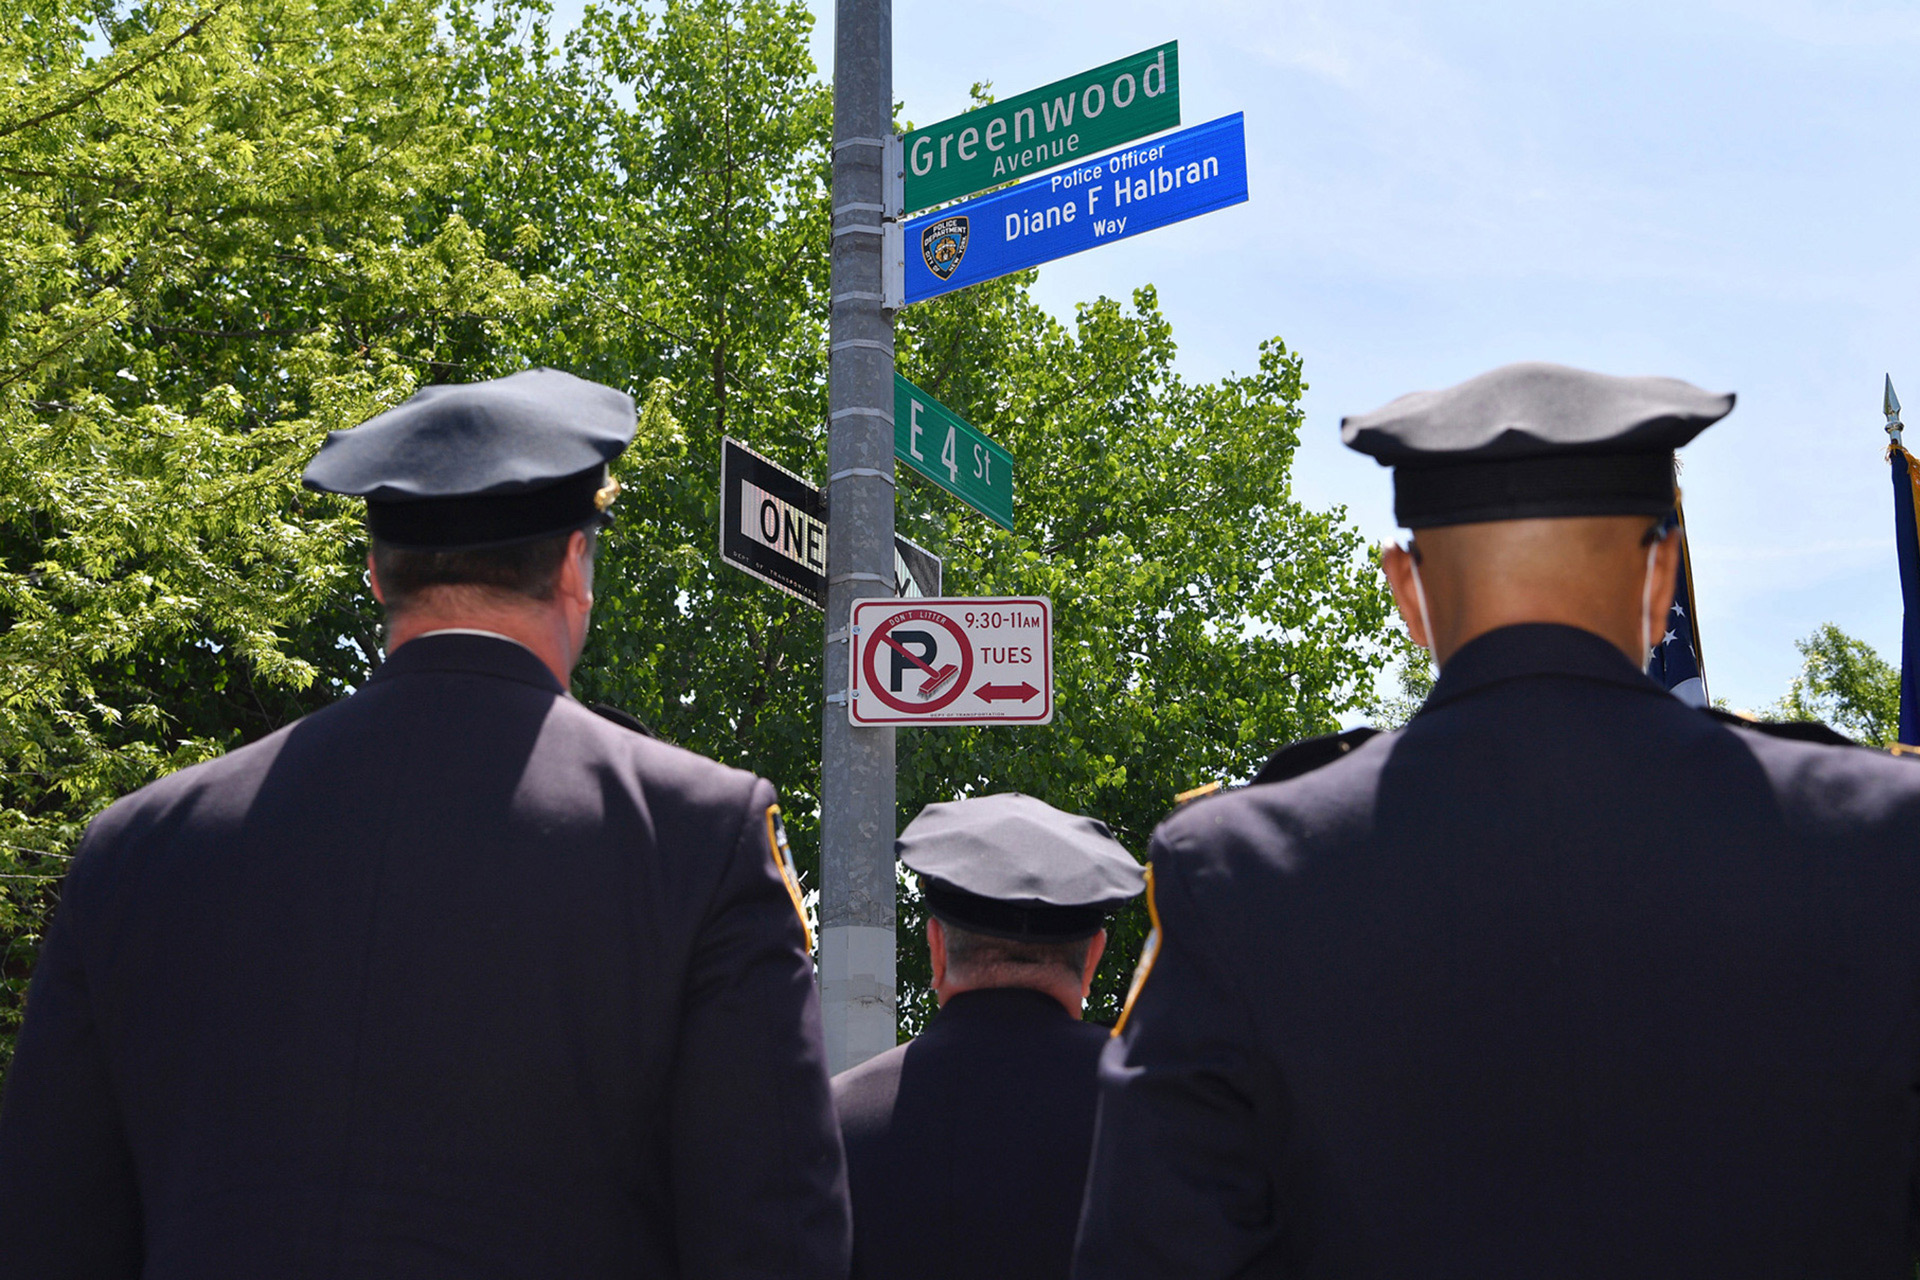 diane-halbran-street-renaming-3-Police-stand-near-the-sign-during-the-street-renaming-ceremony